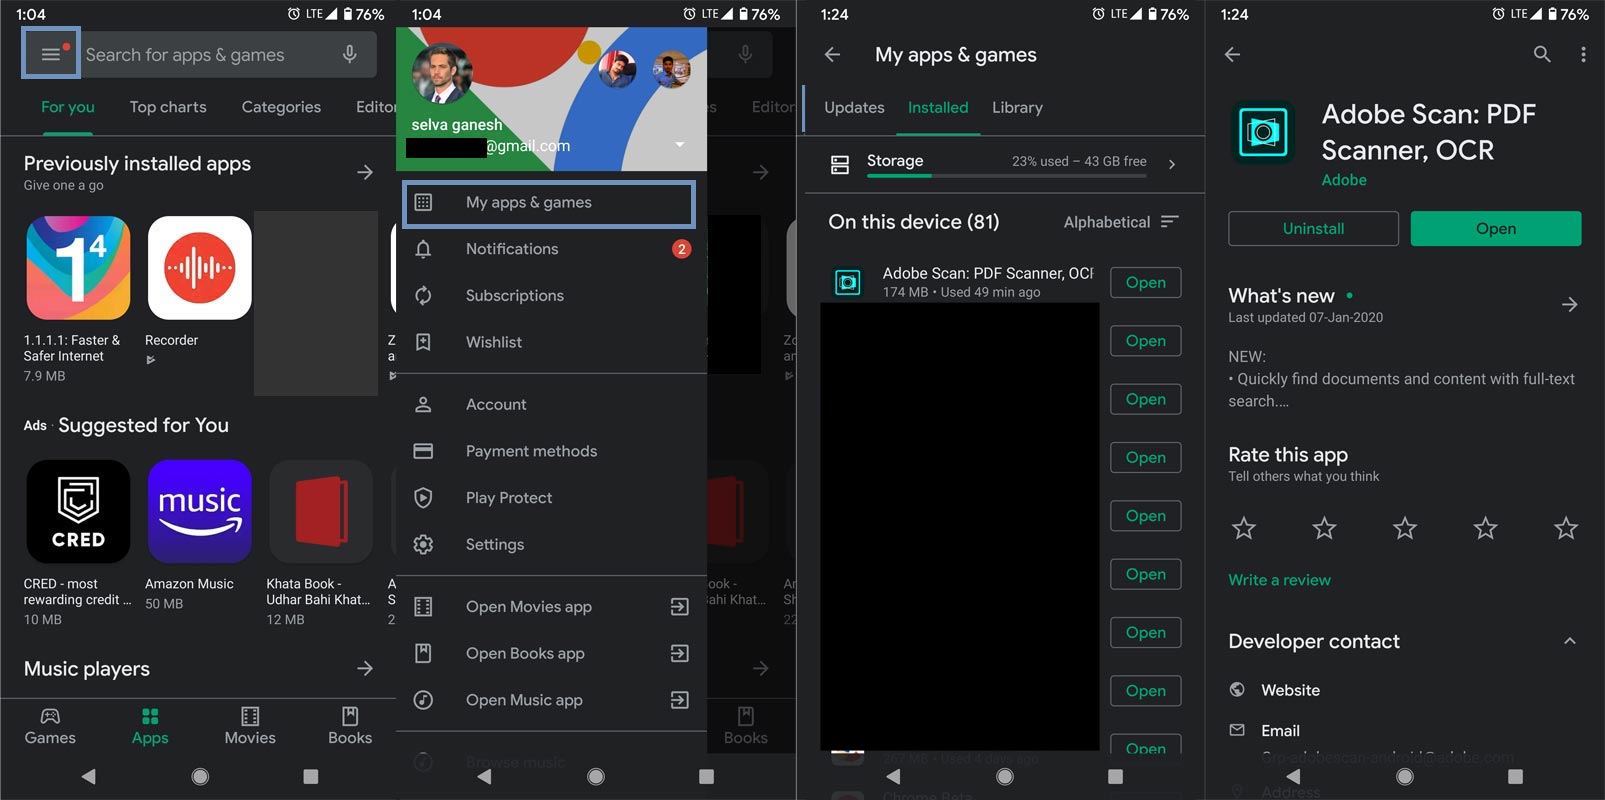 Uninstall Installed app in Play Store